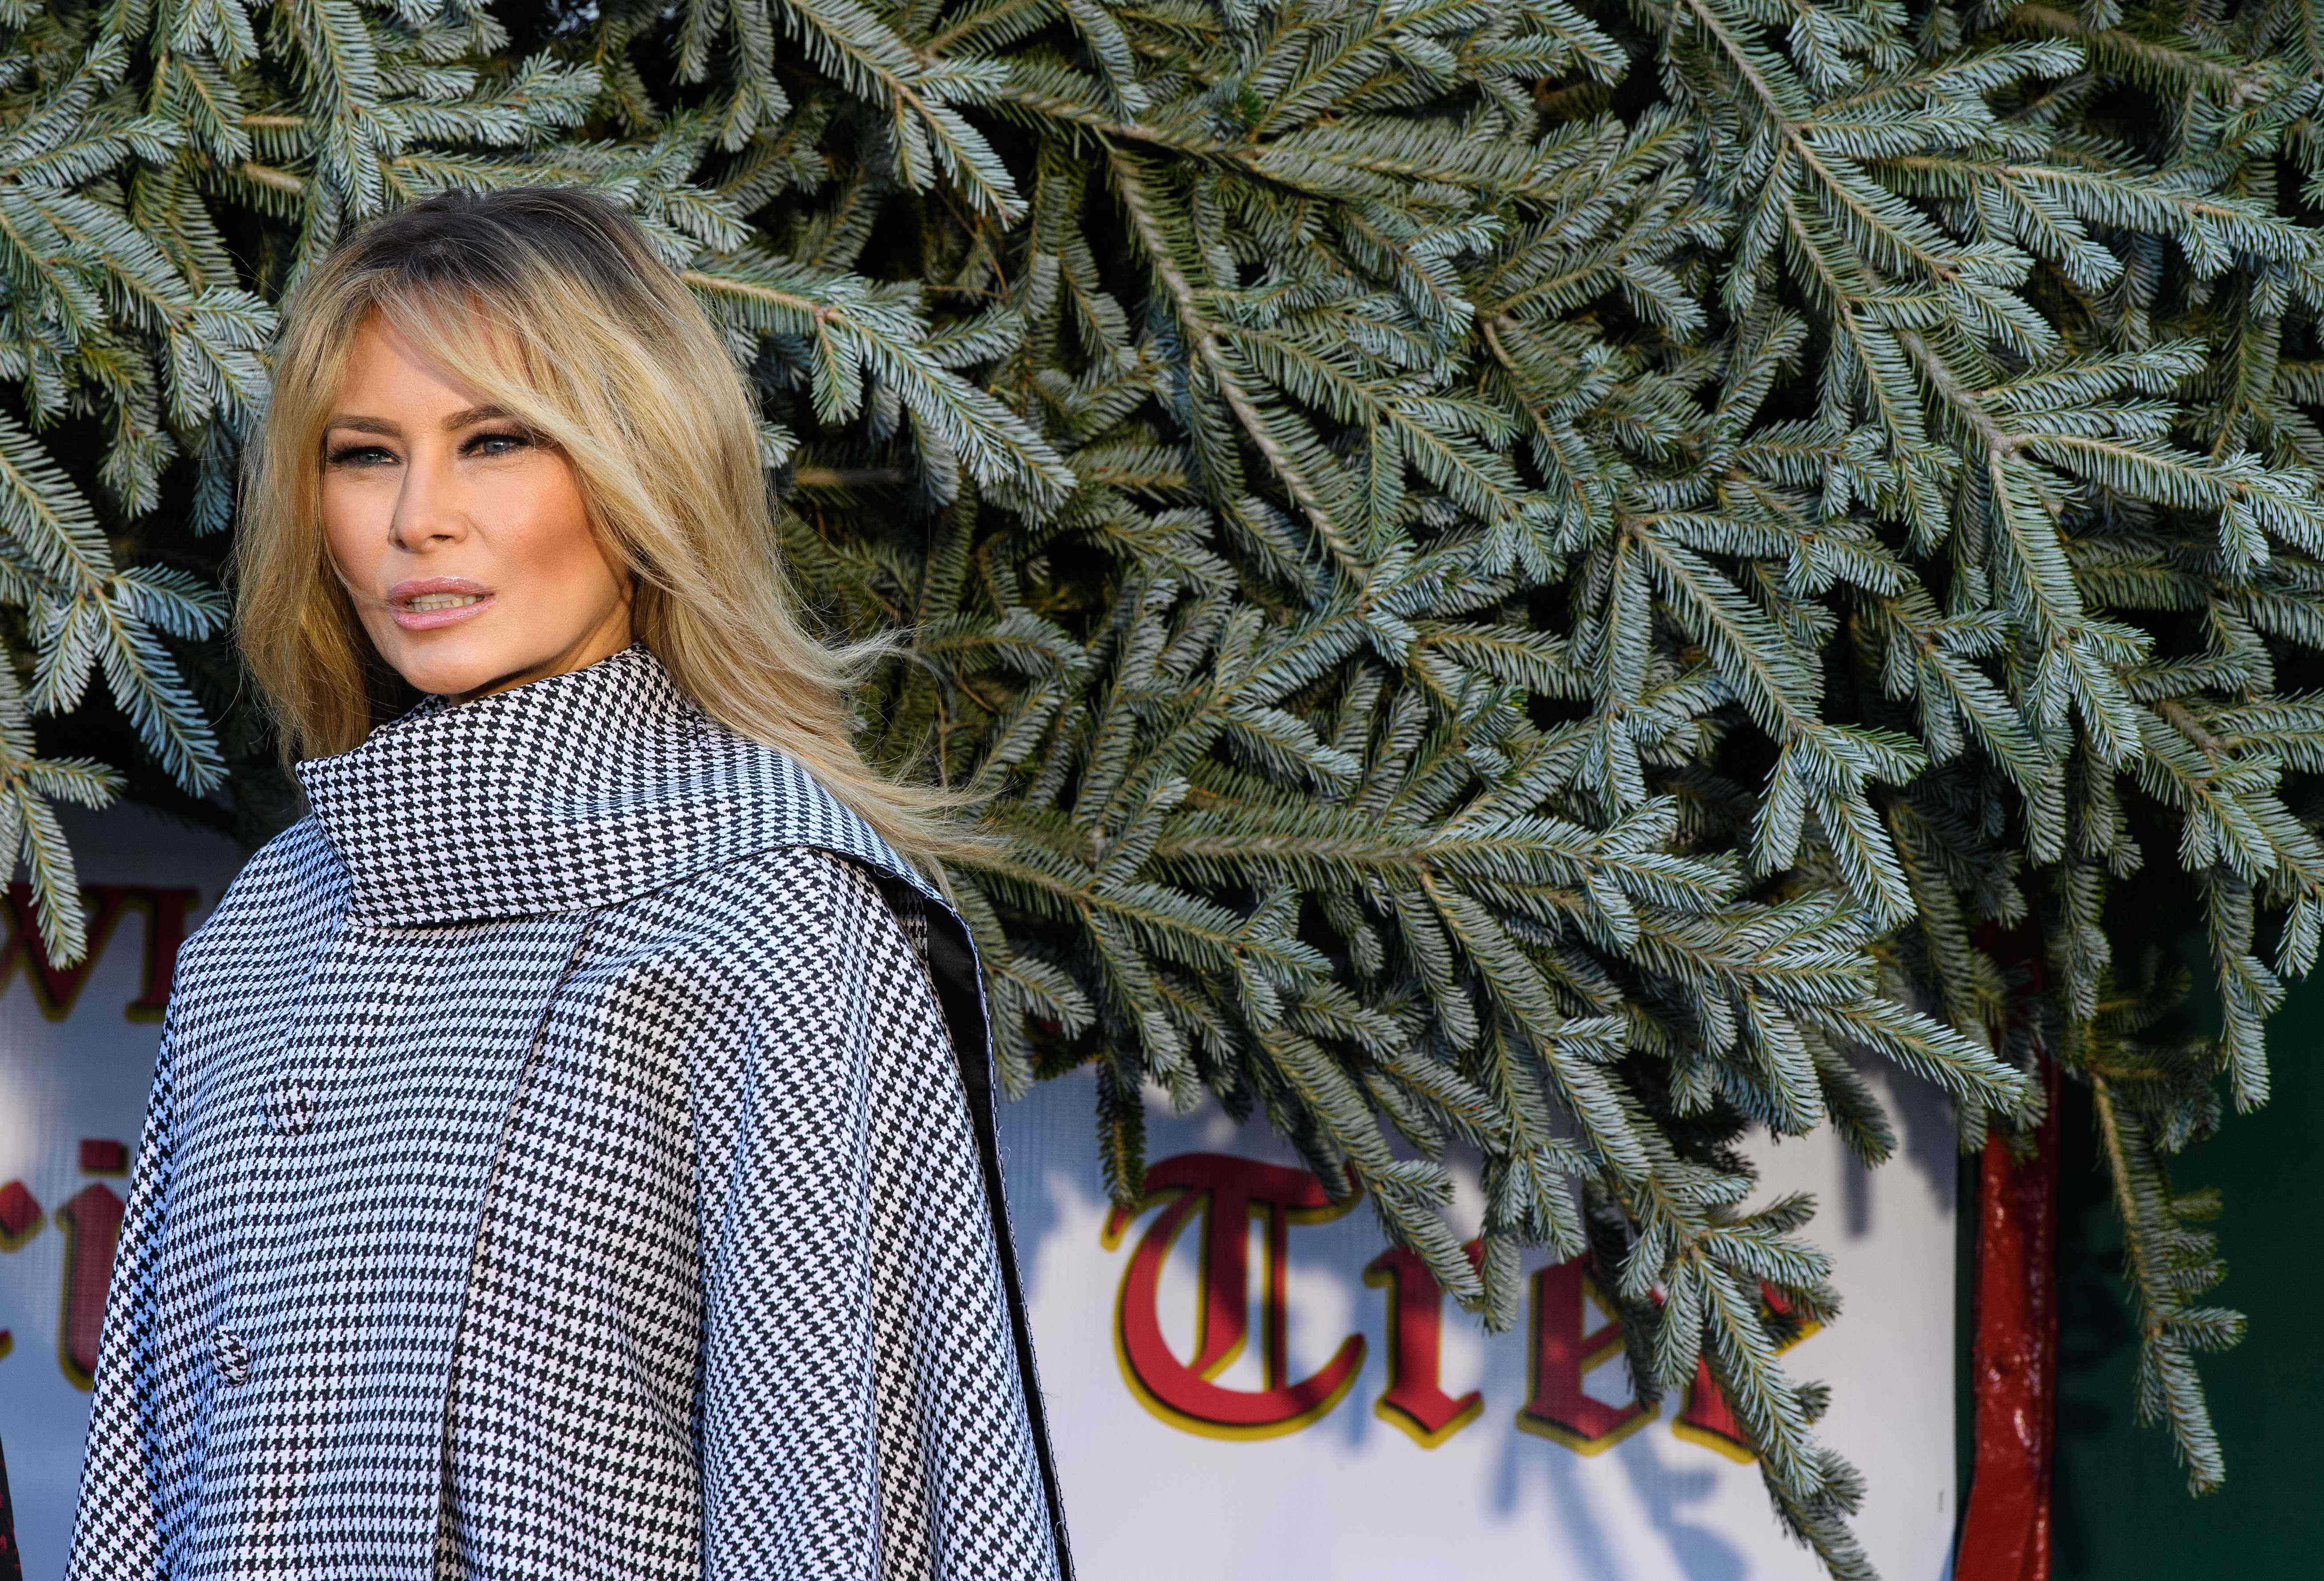 US First Lady Melania Trump receives the White House Christmas Tree at the White House in Washington, DC, on November 23, 2020. (Photo by NICHOLAS KAMM / AFP) (Photo by NICHOLAS KAMM/AFP via Getty Images)